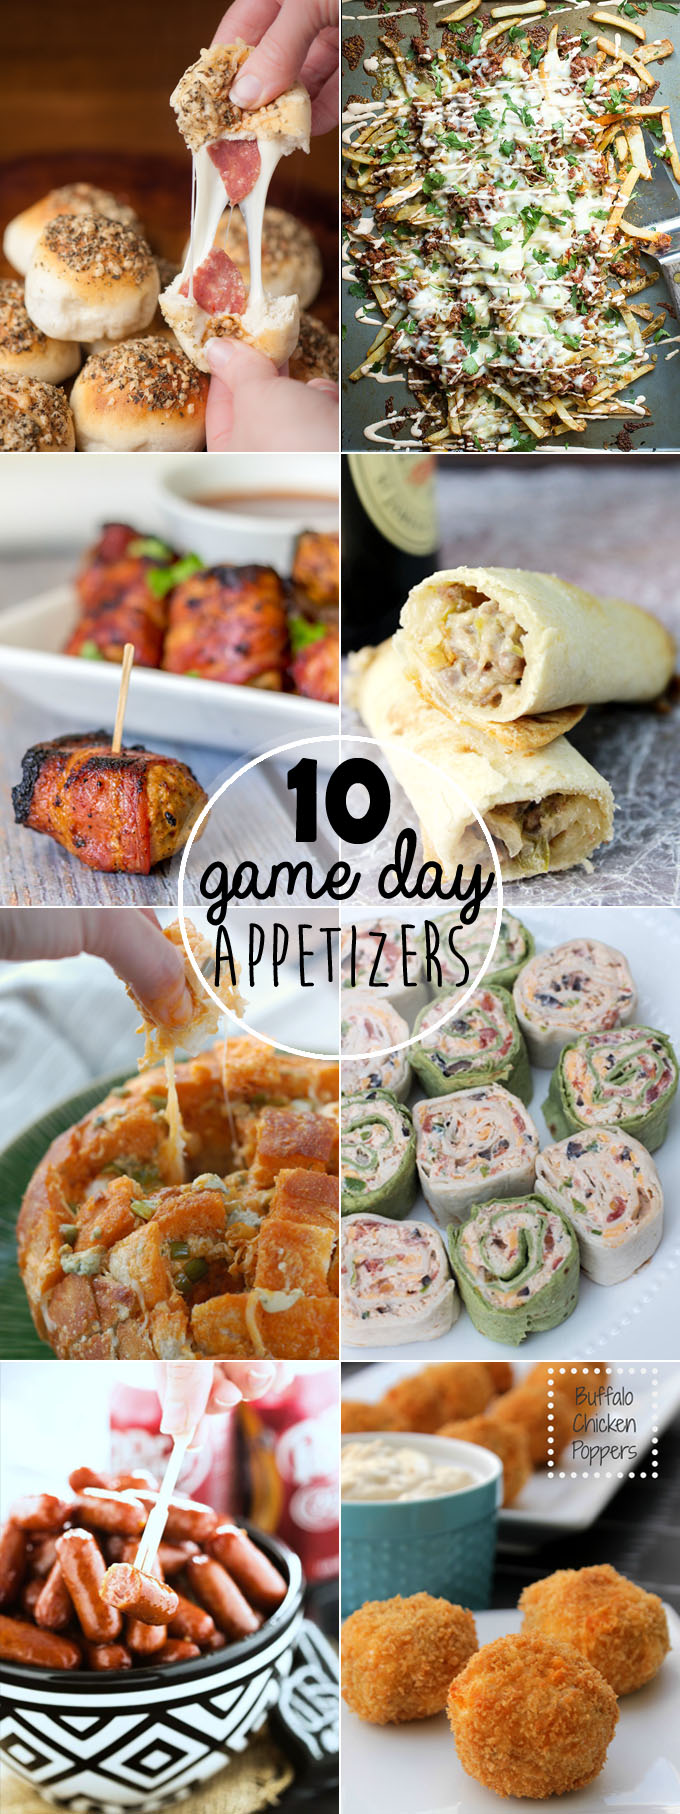 10-game-day-appetizers-pinterest